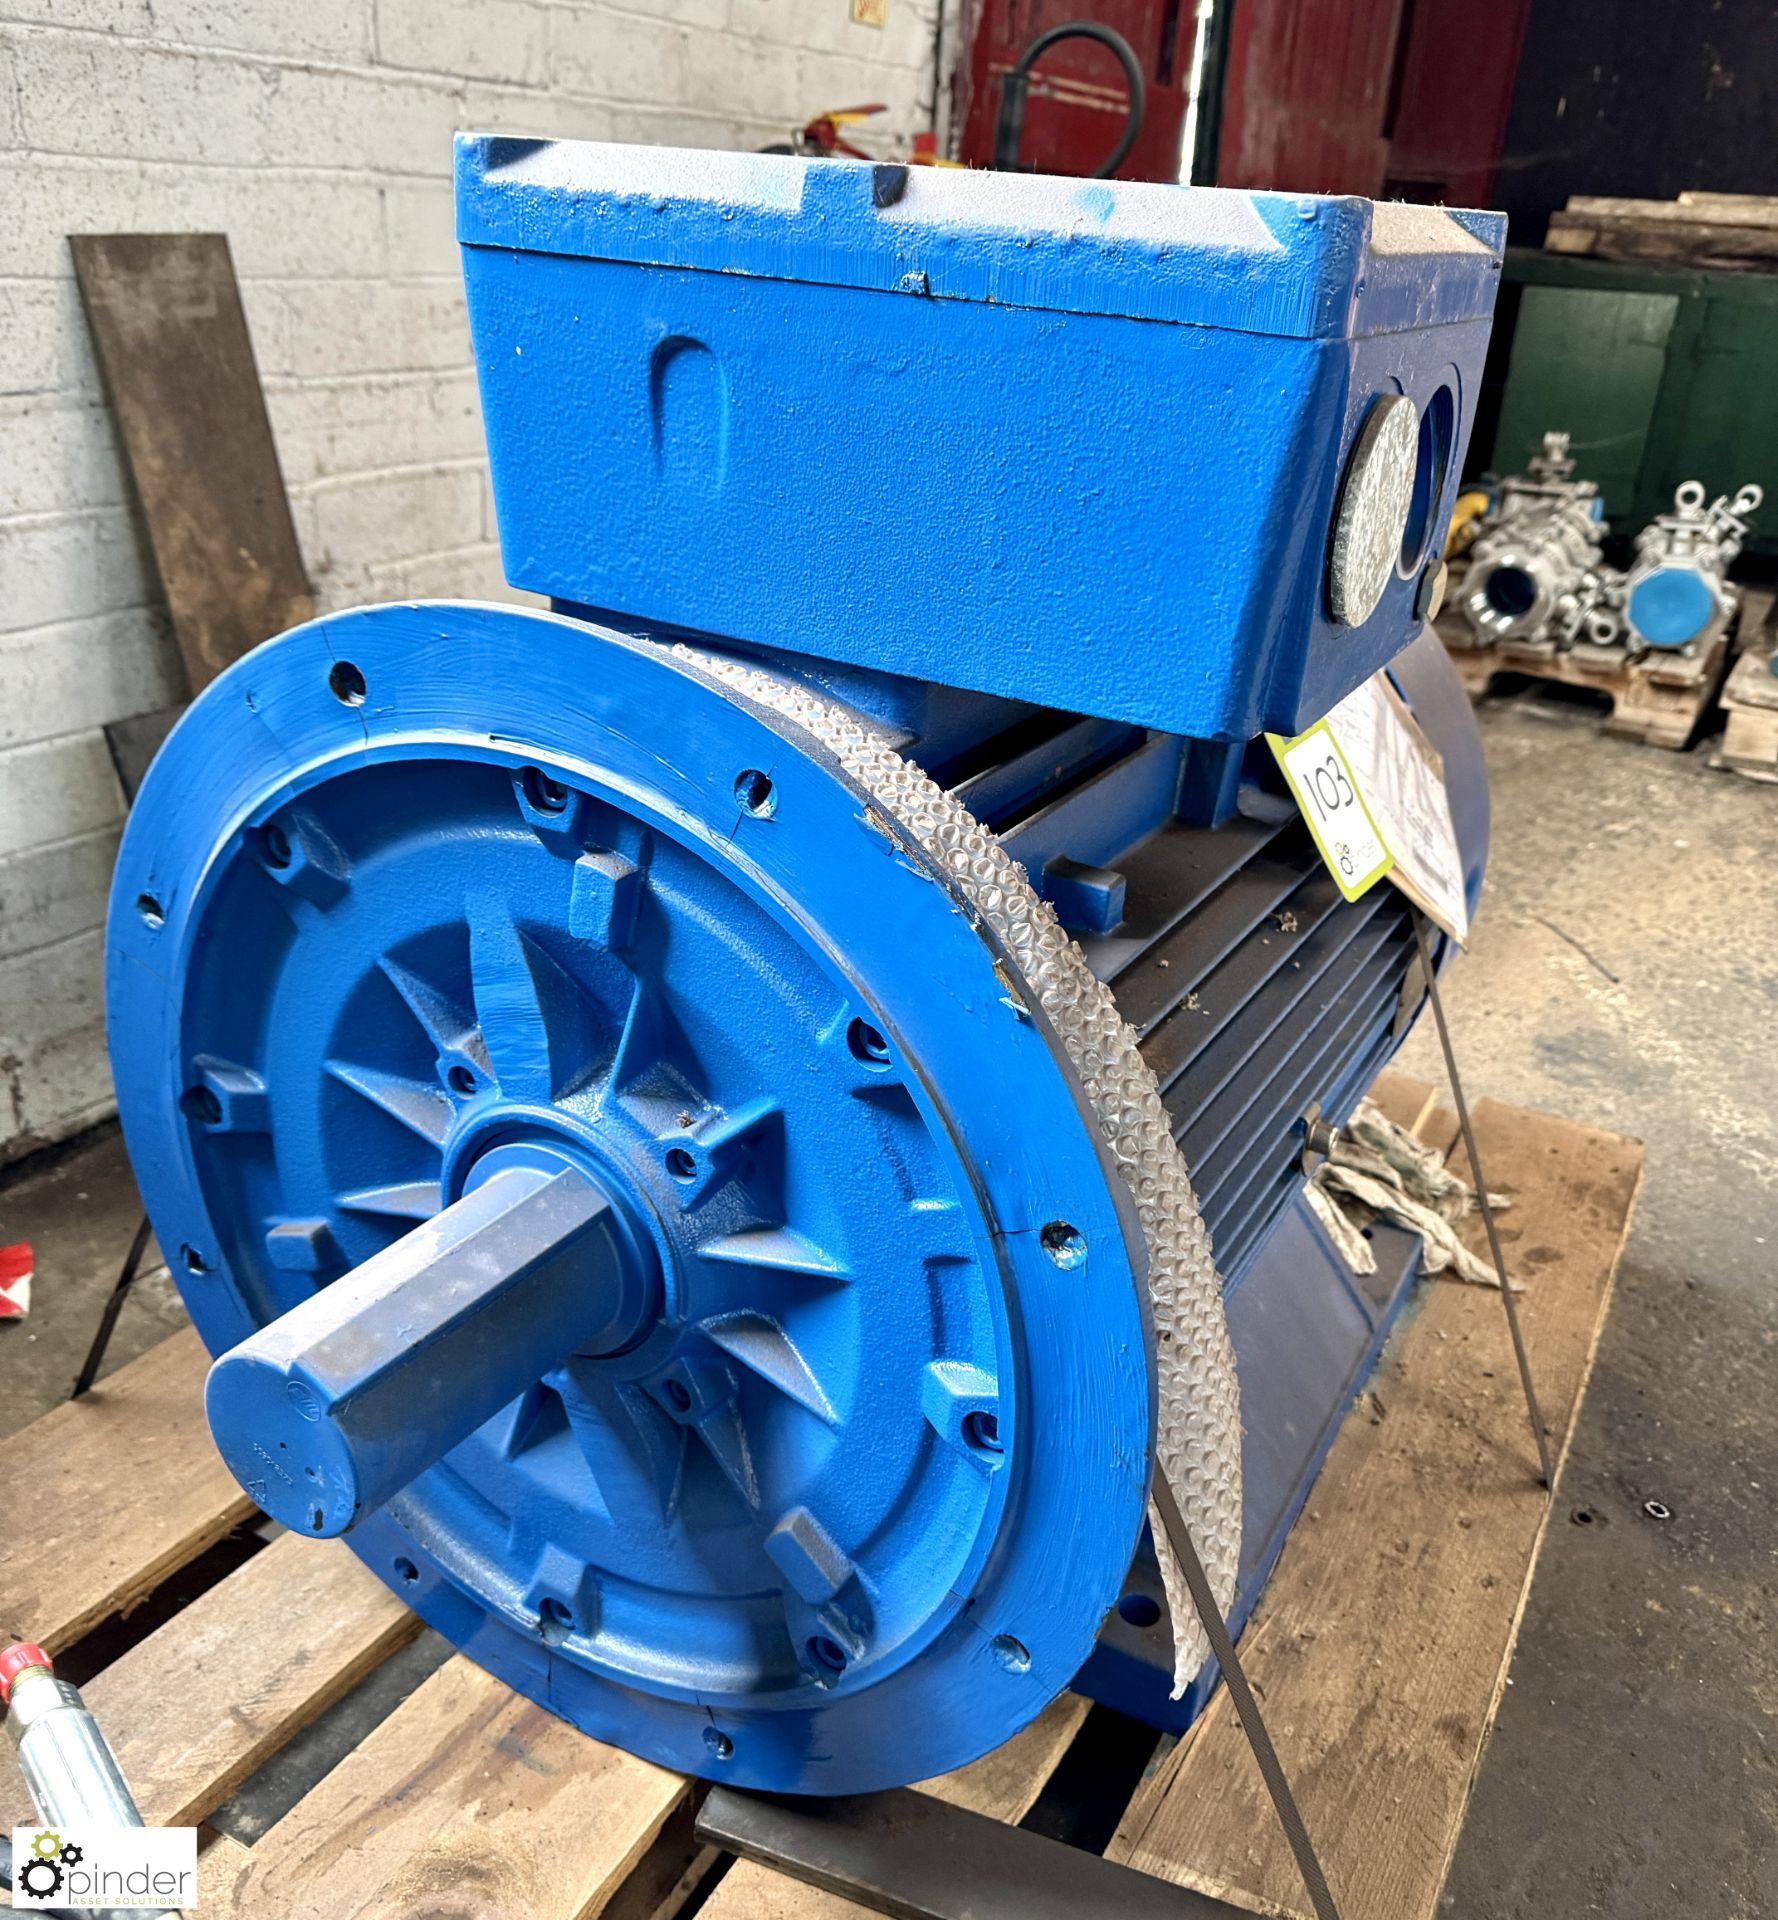 Marelli D5X 280 S4 B35 ATEX Electric Motor, refurbished, unused (LOCATION: Nottingham – collection - Image 2 of 5